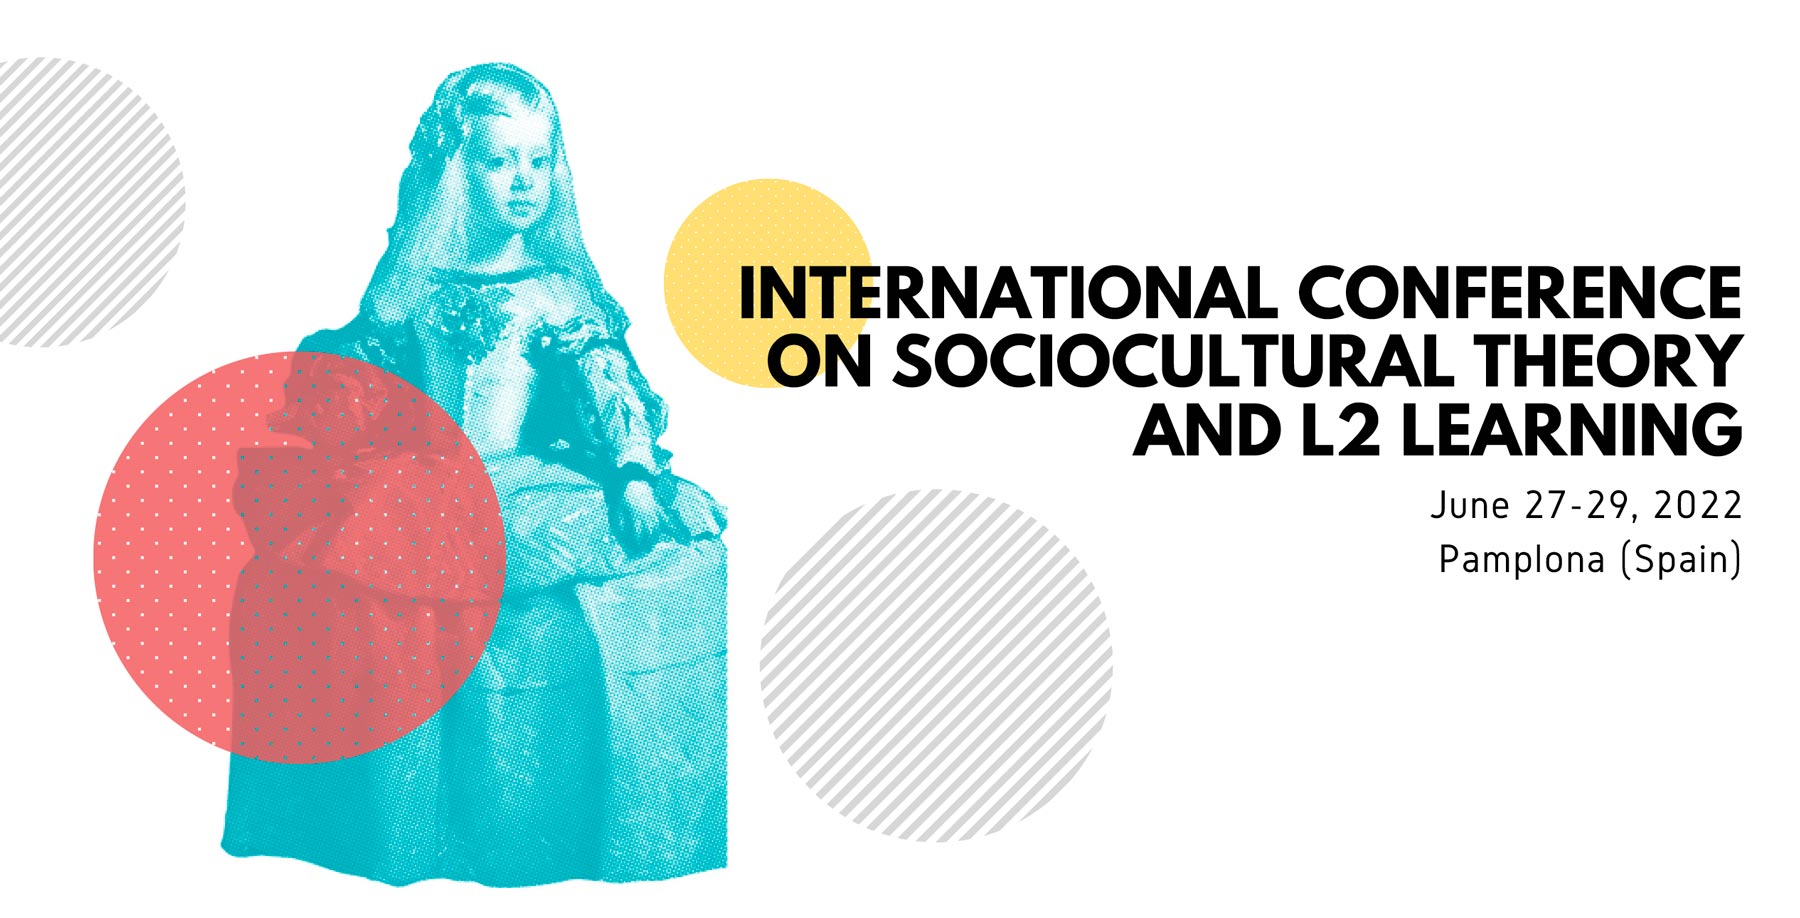 The IV International Conference on Sociocultural Theory and L2 Learning